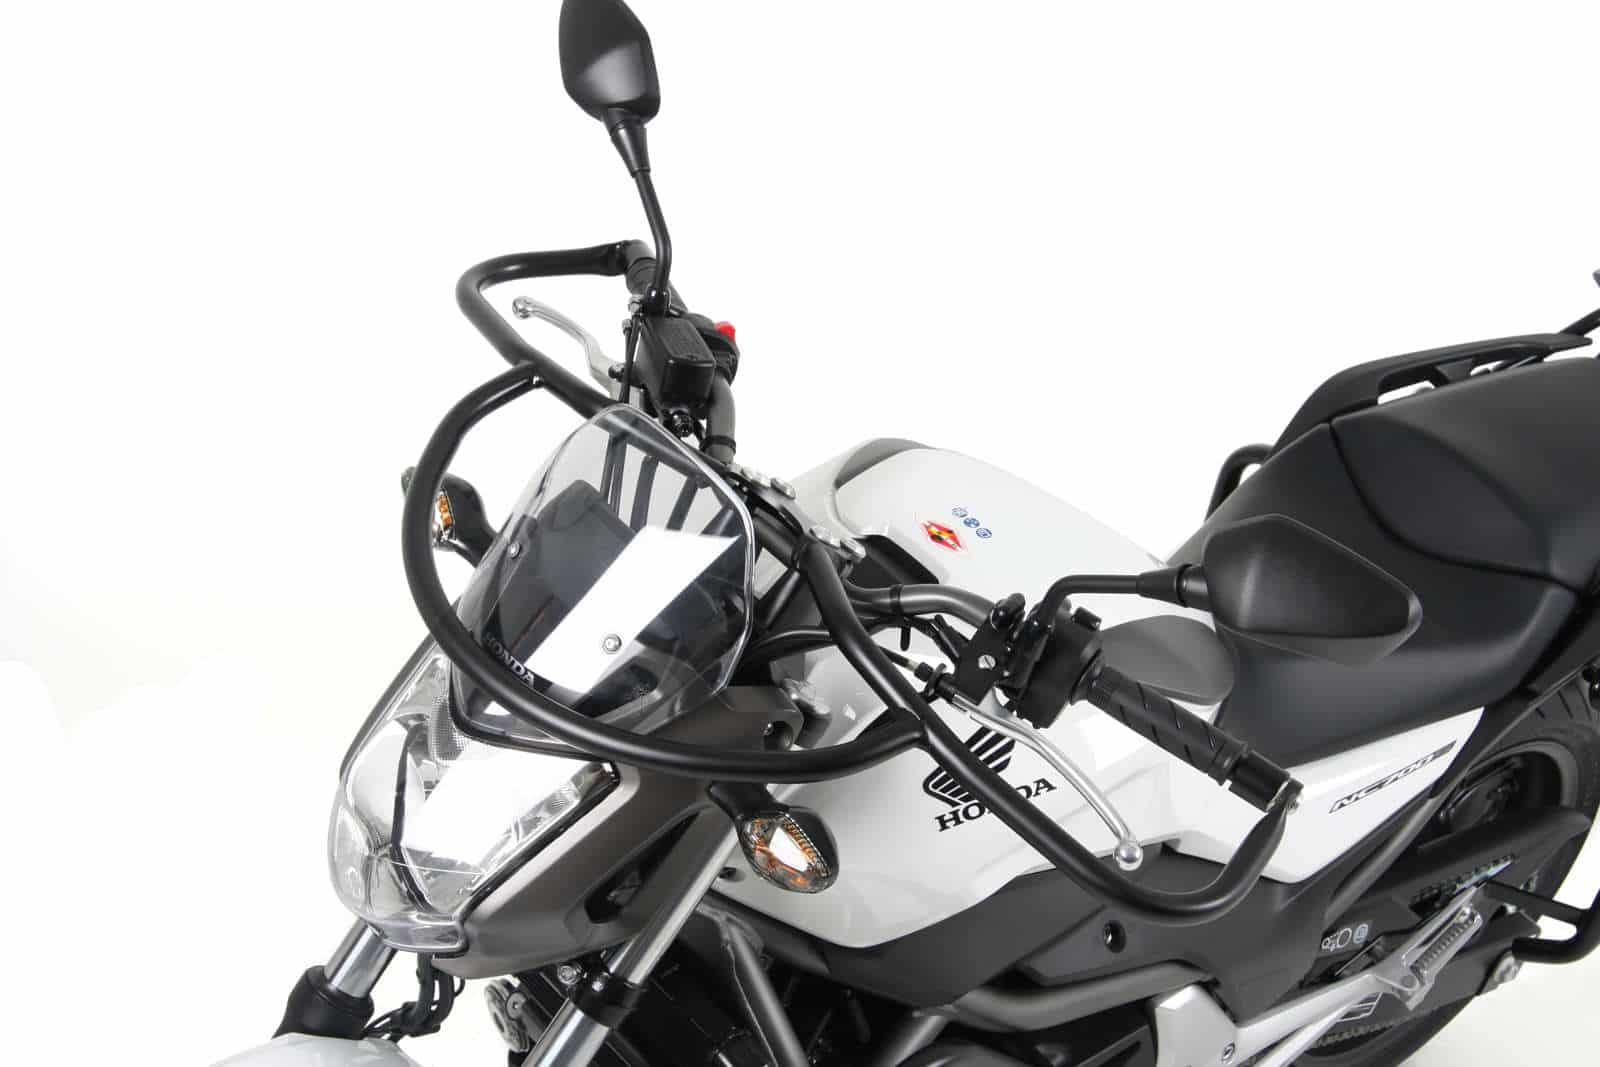 Front protection bar - black for Honda NC 700 S (2012-2013)/750 S/DCT (2014-)